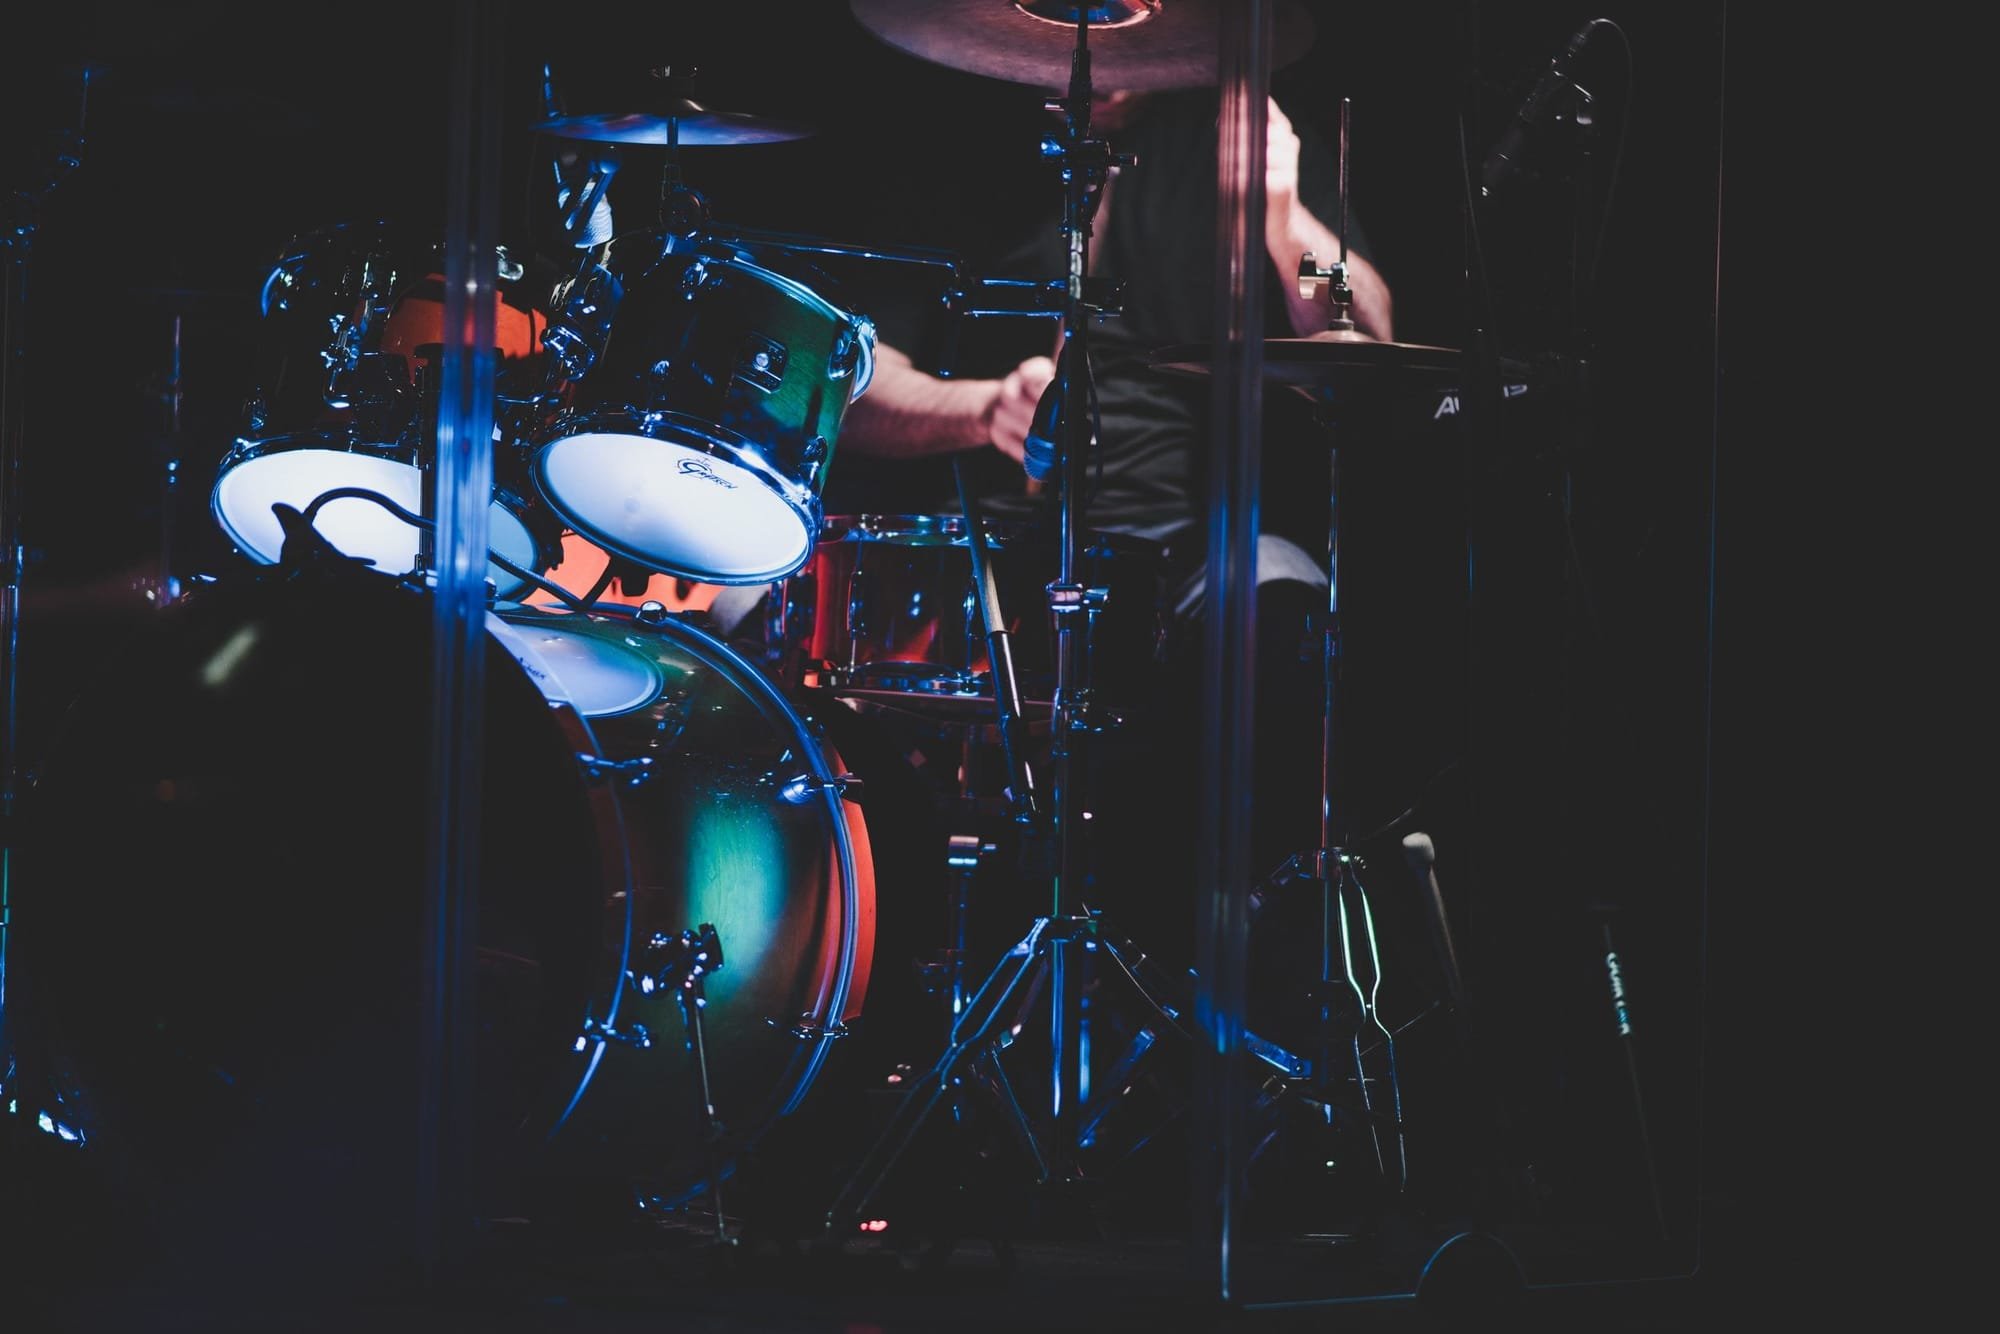 Four ways playing drums can have a positive impact on your life
Personal development